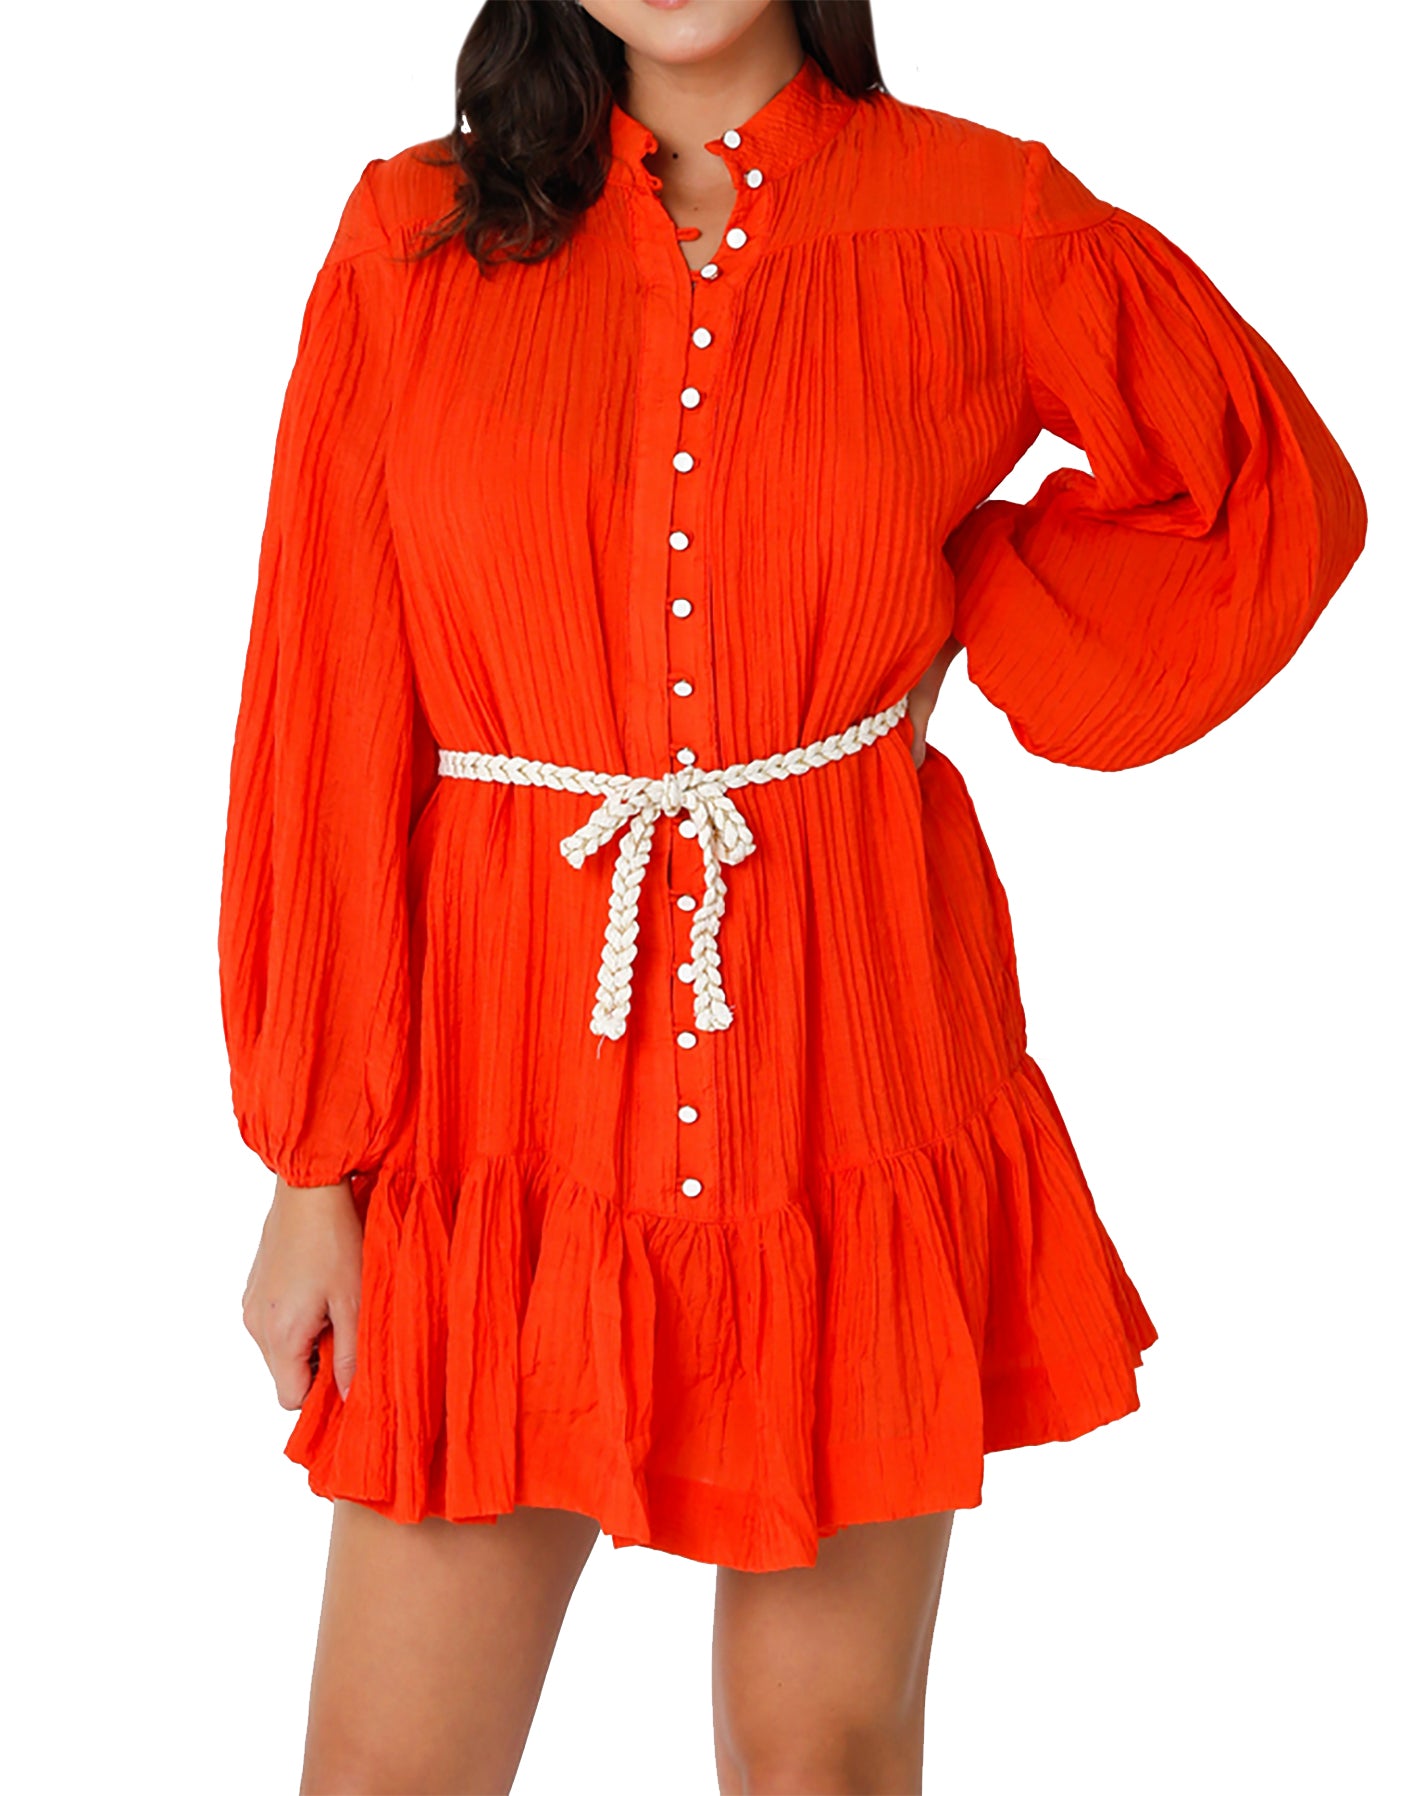 Clementine Belted Dress